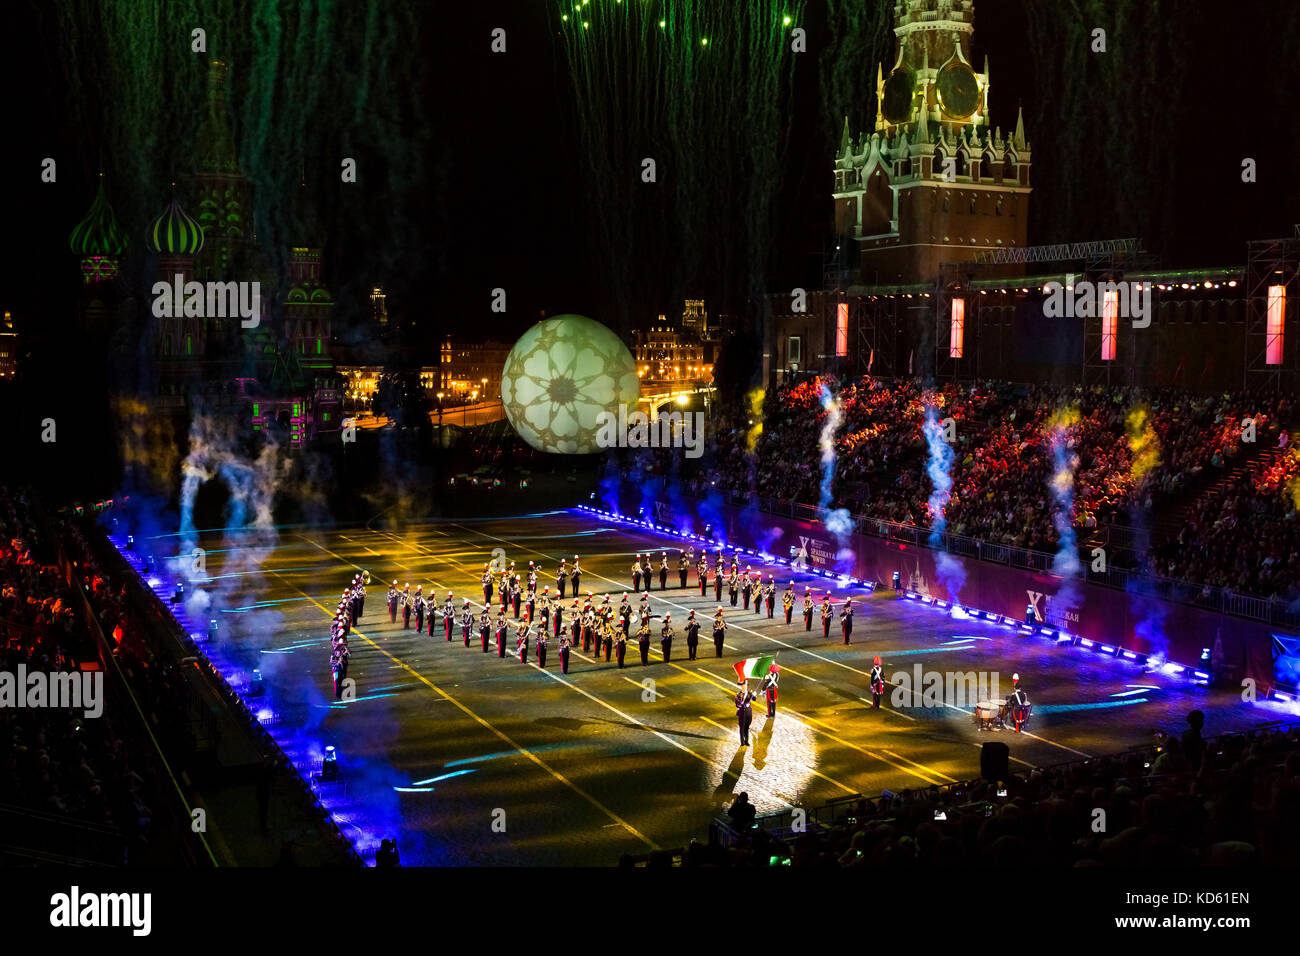 Performance of The Carabinieri band of Italy on International Military Tattoo Music Festival “Spasskaya Tower” in Moscow, Russia Stock Photo